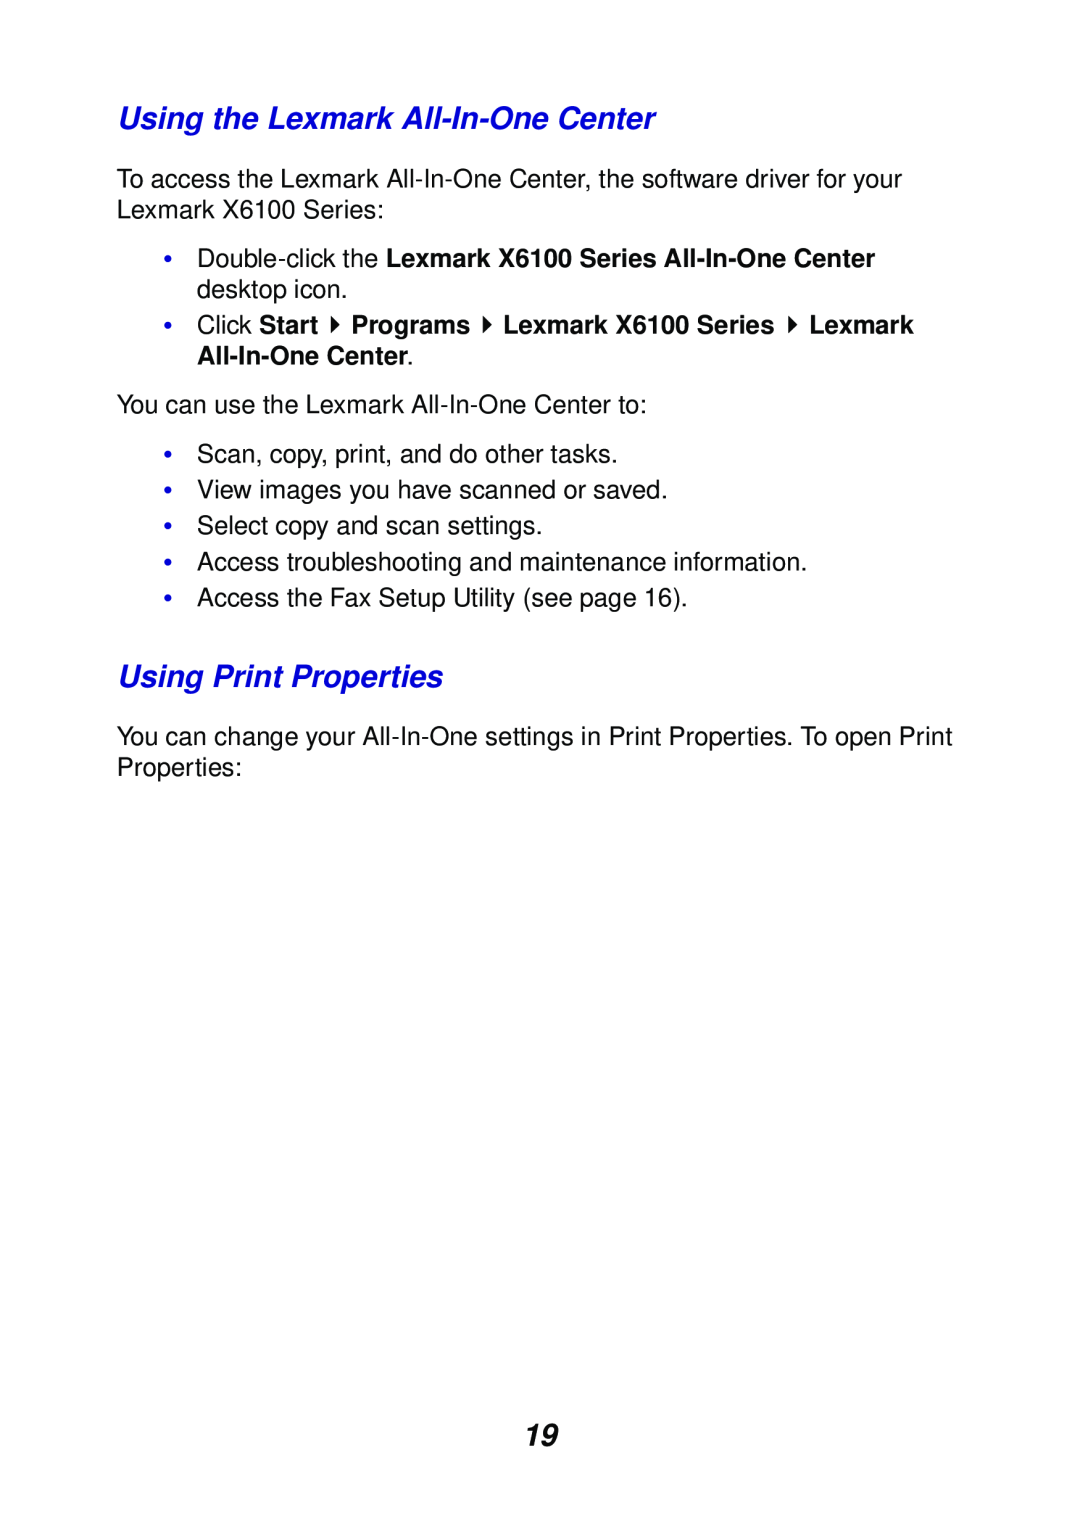 Lexmark X6100 manual Using the Lexmark All-In-OneCenter, Using Print Properties 